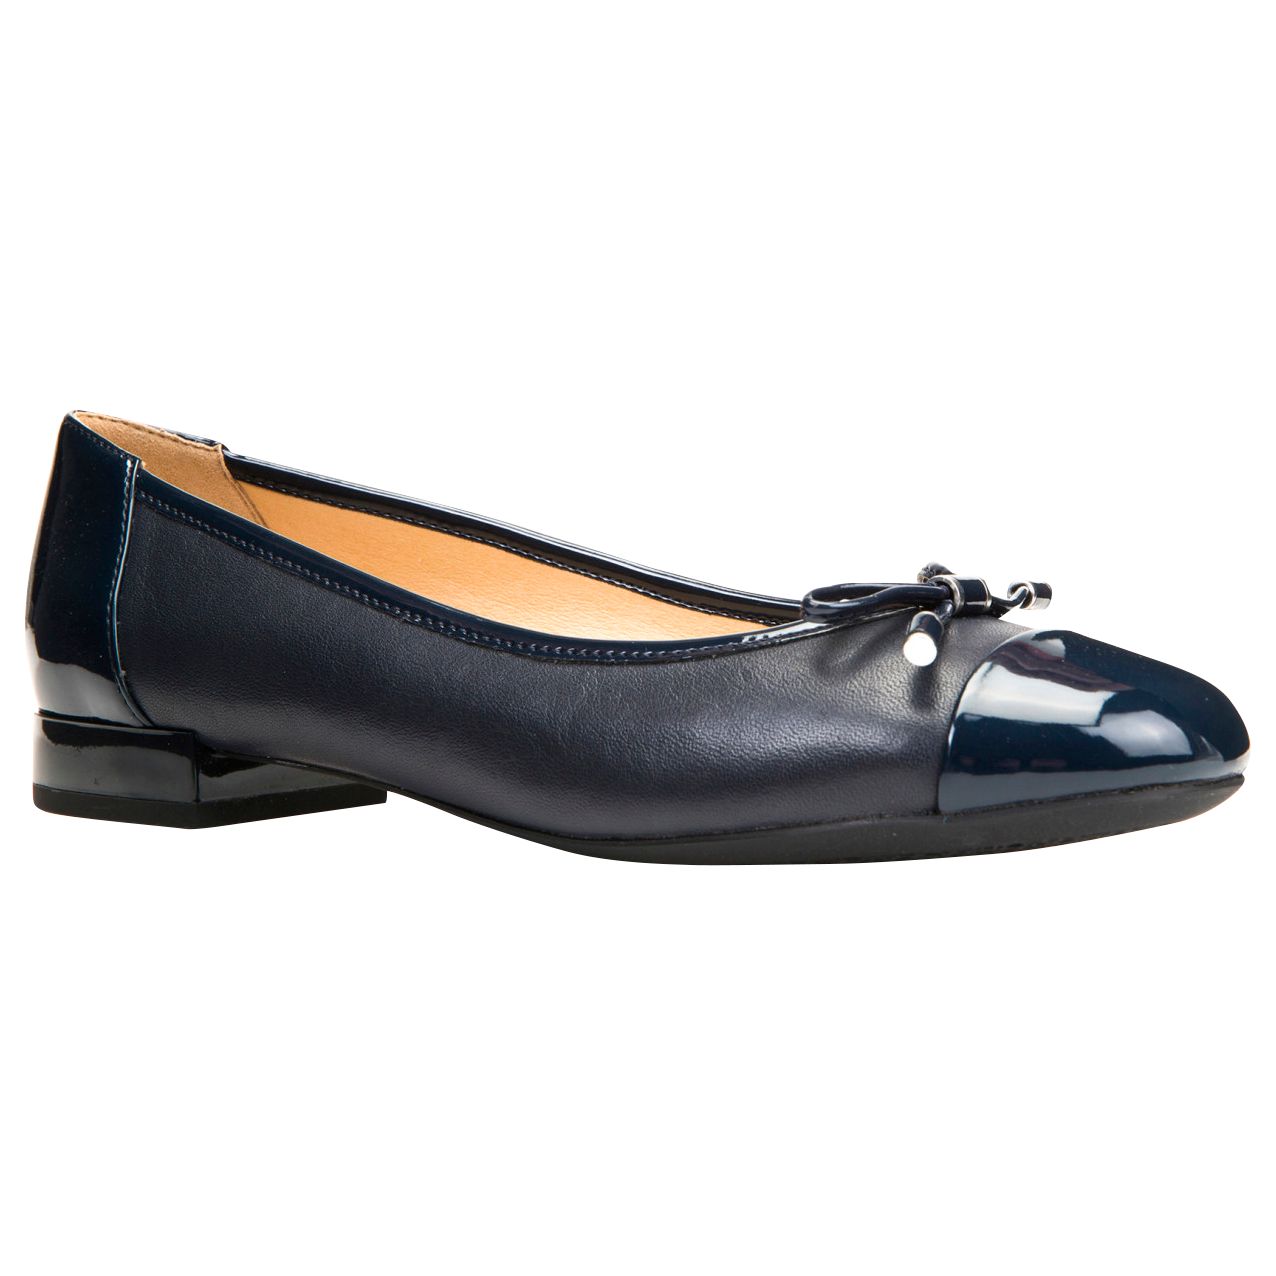 Geox Women's Wistrey Breathable Ballet Pumps, Navy Leather, 6